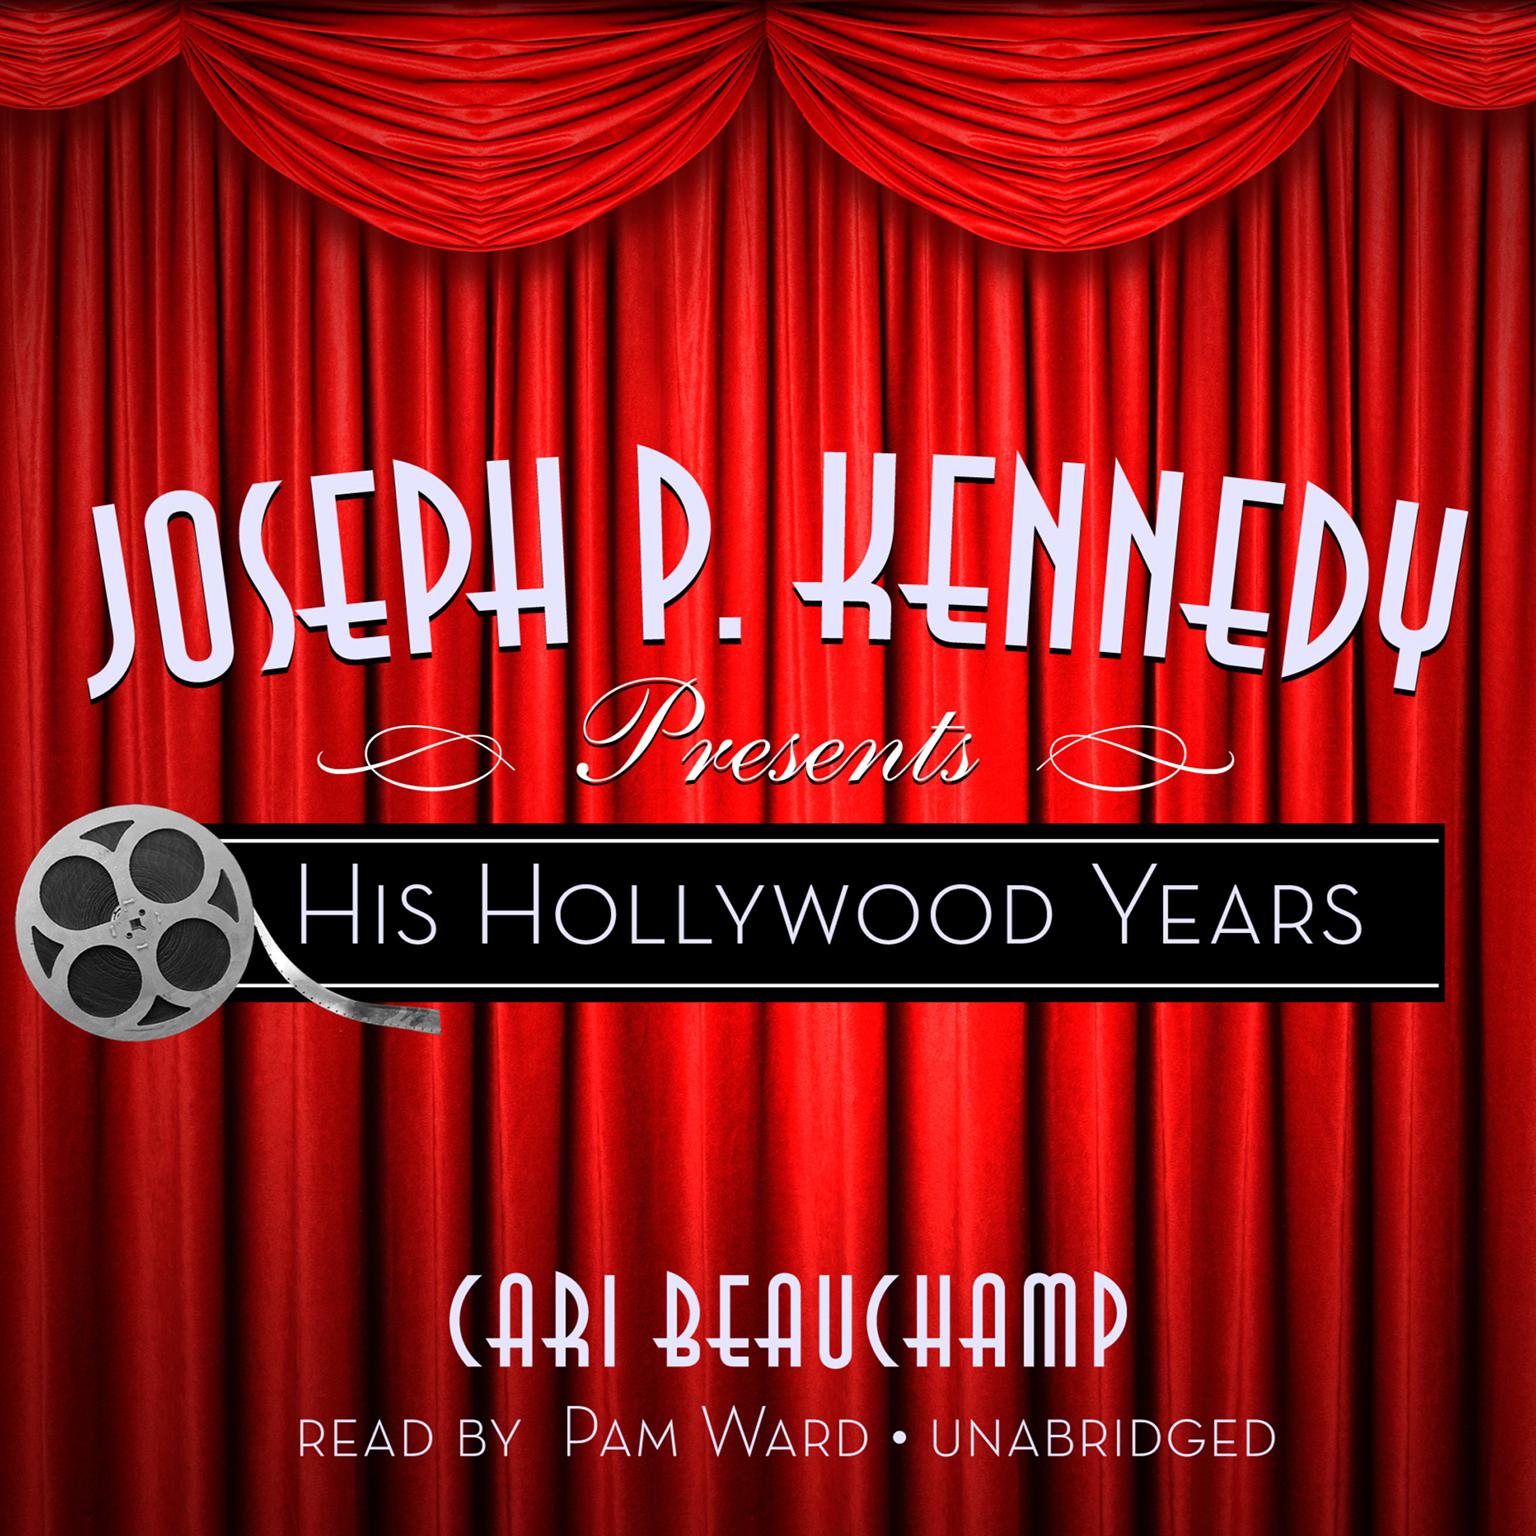 Joseph P. Kennedy Presents: His Hollywood Years Audiobook, by Cari Beauchamp